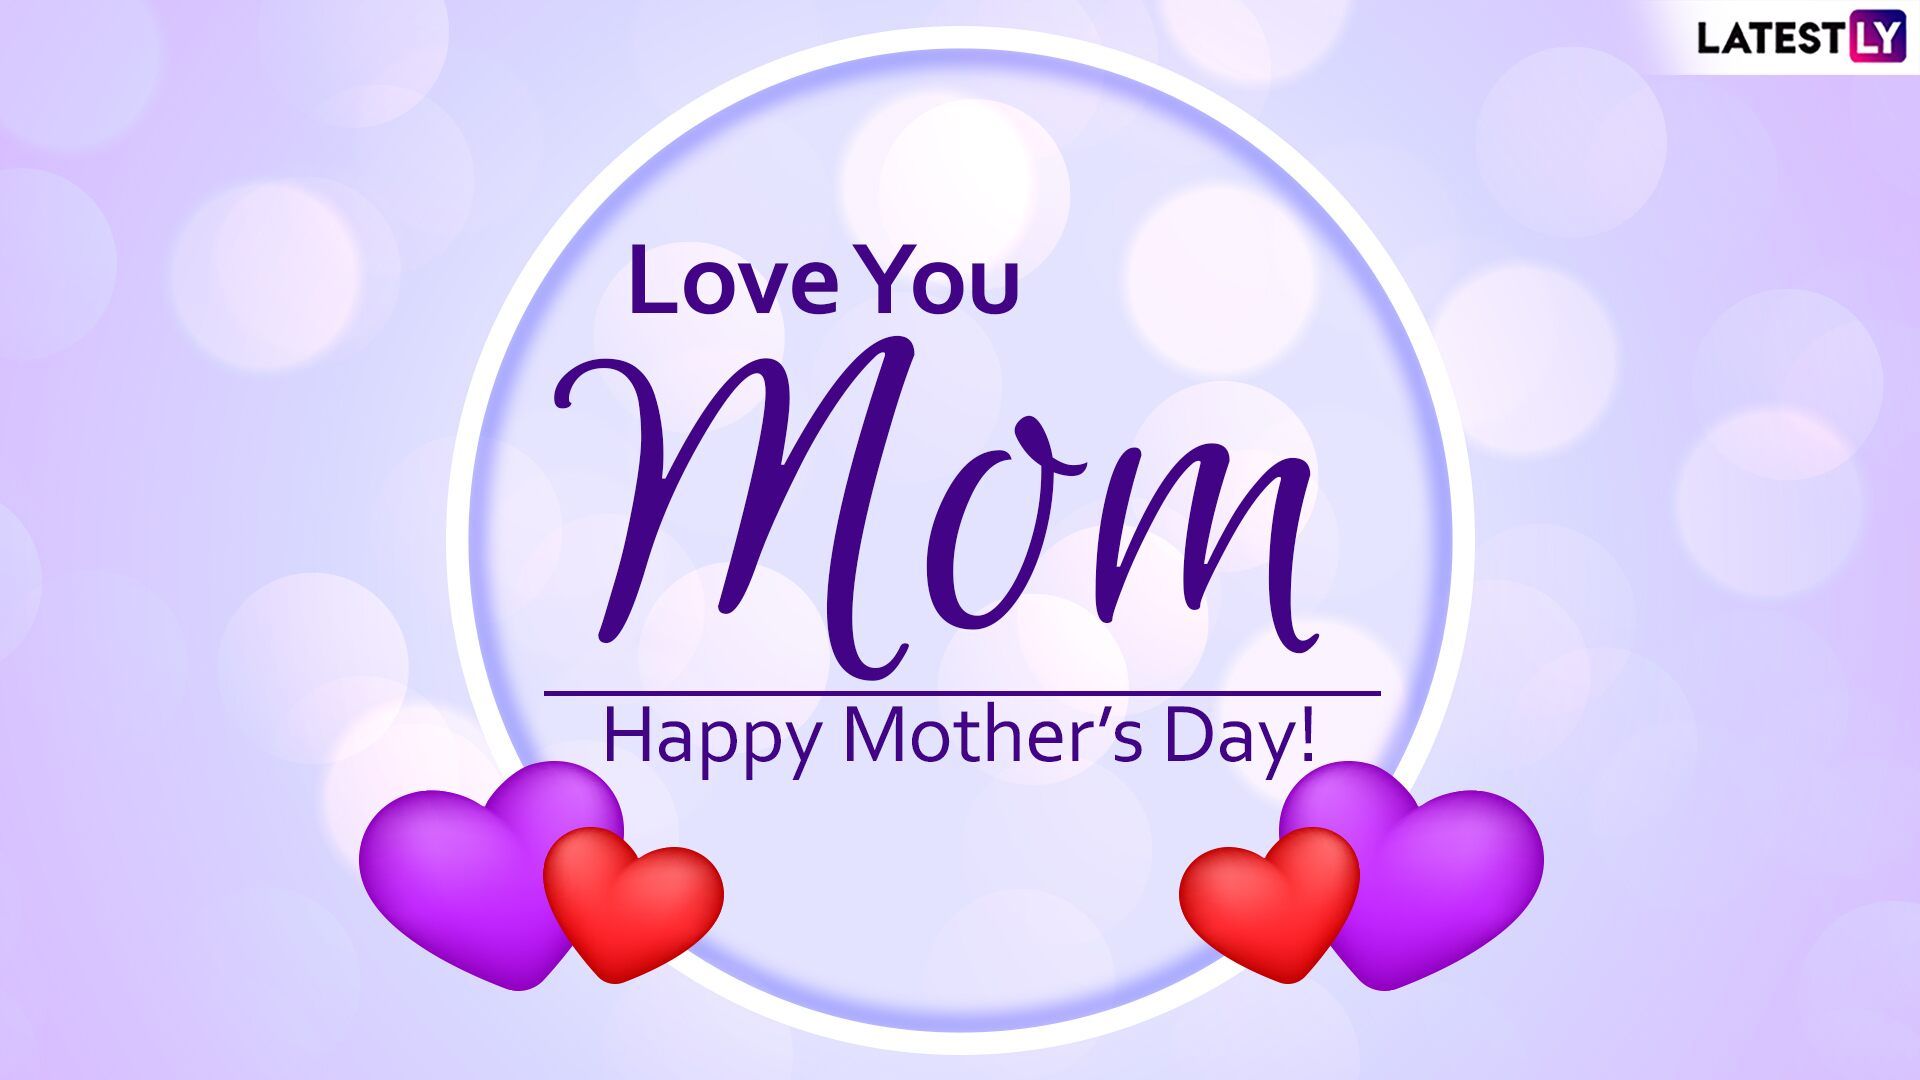 Happy Mother's Day HD Image, Quotes and Wallpaper for Free